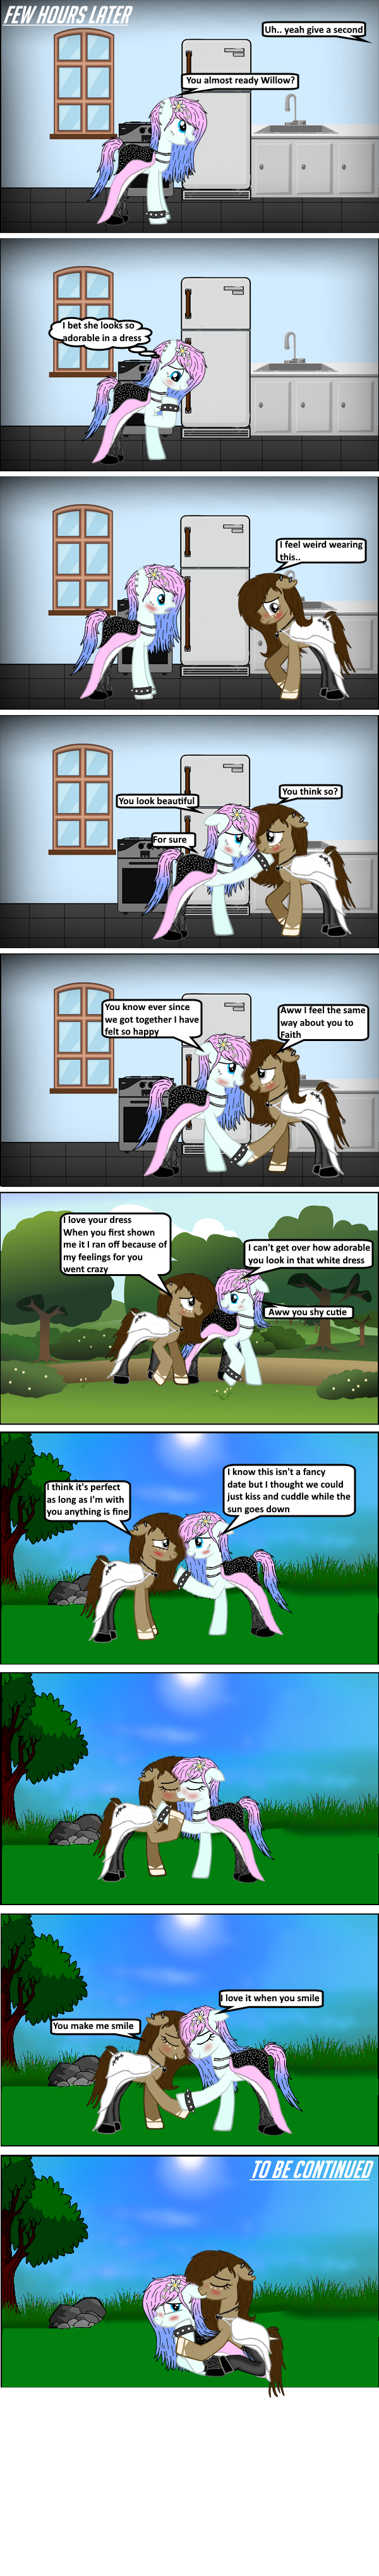 Page 8 - First Date